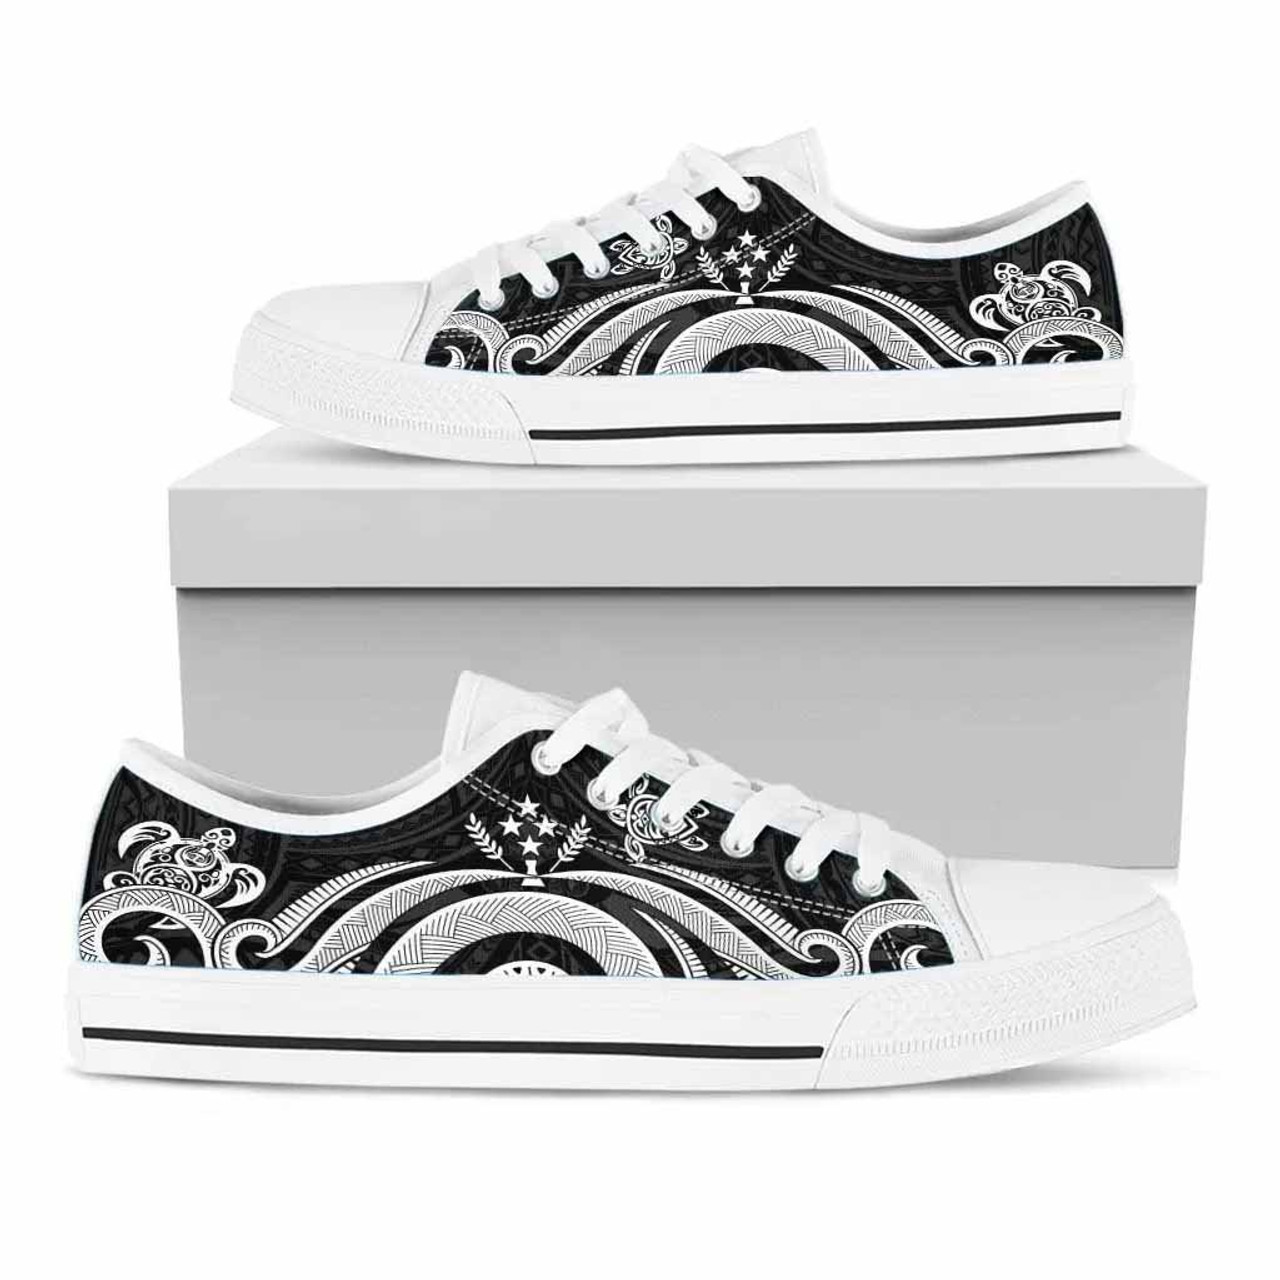 Kosrae Low Top Canvas Shoes - White Tentacle Turtle 5